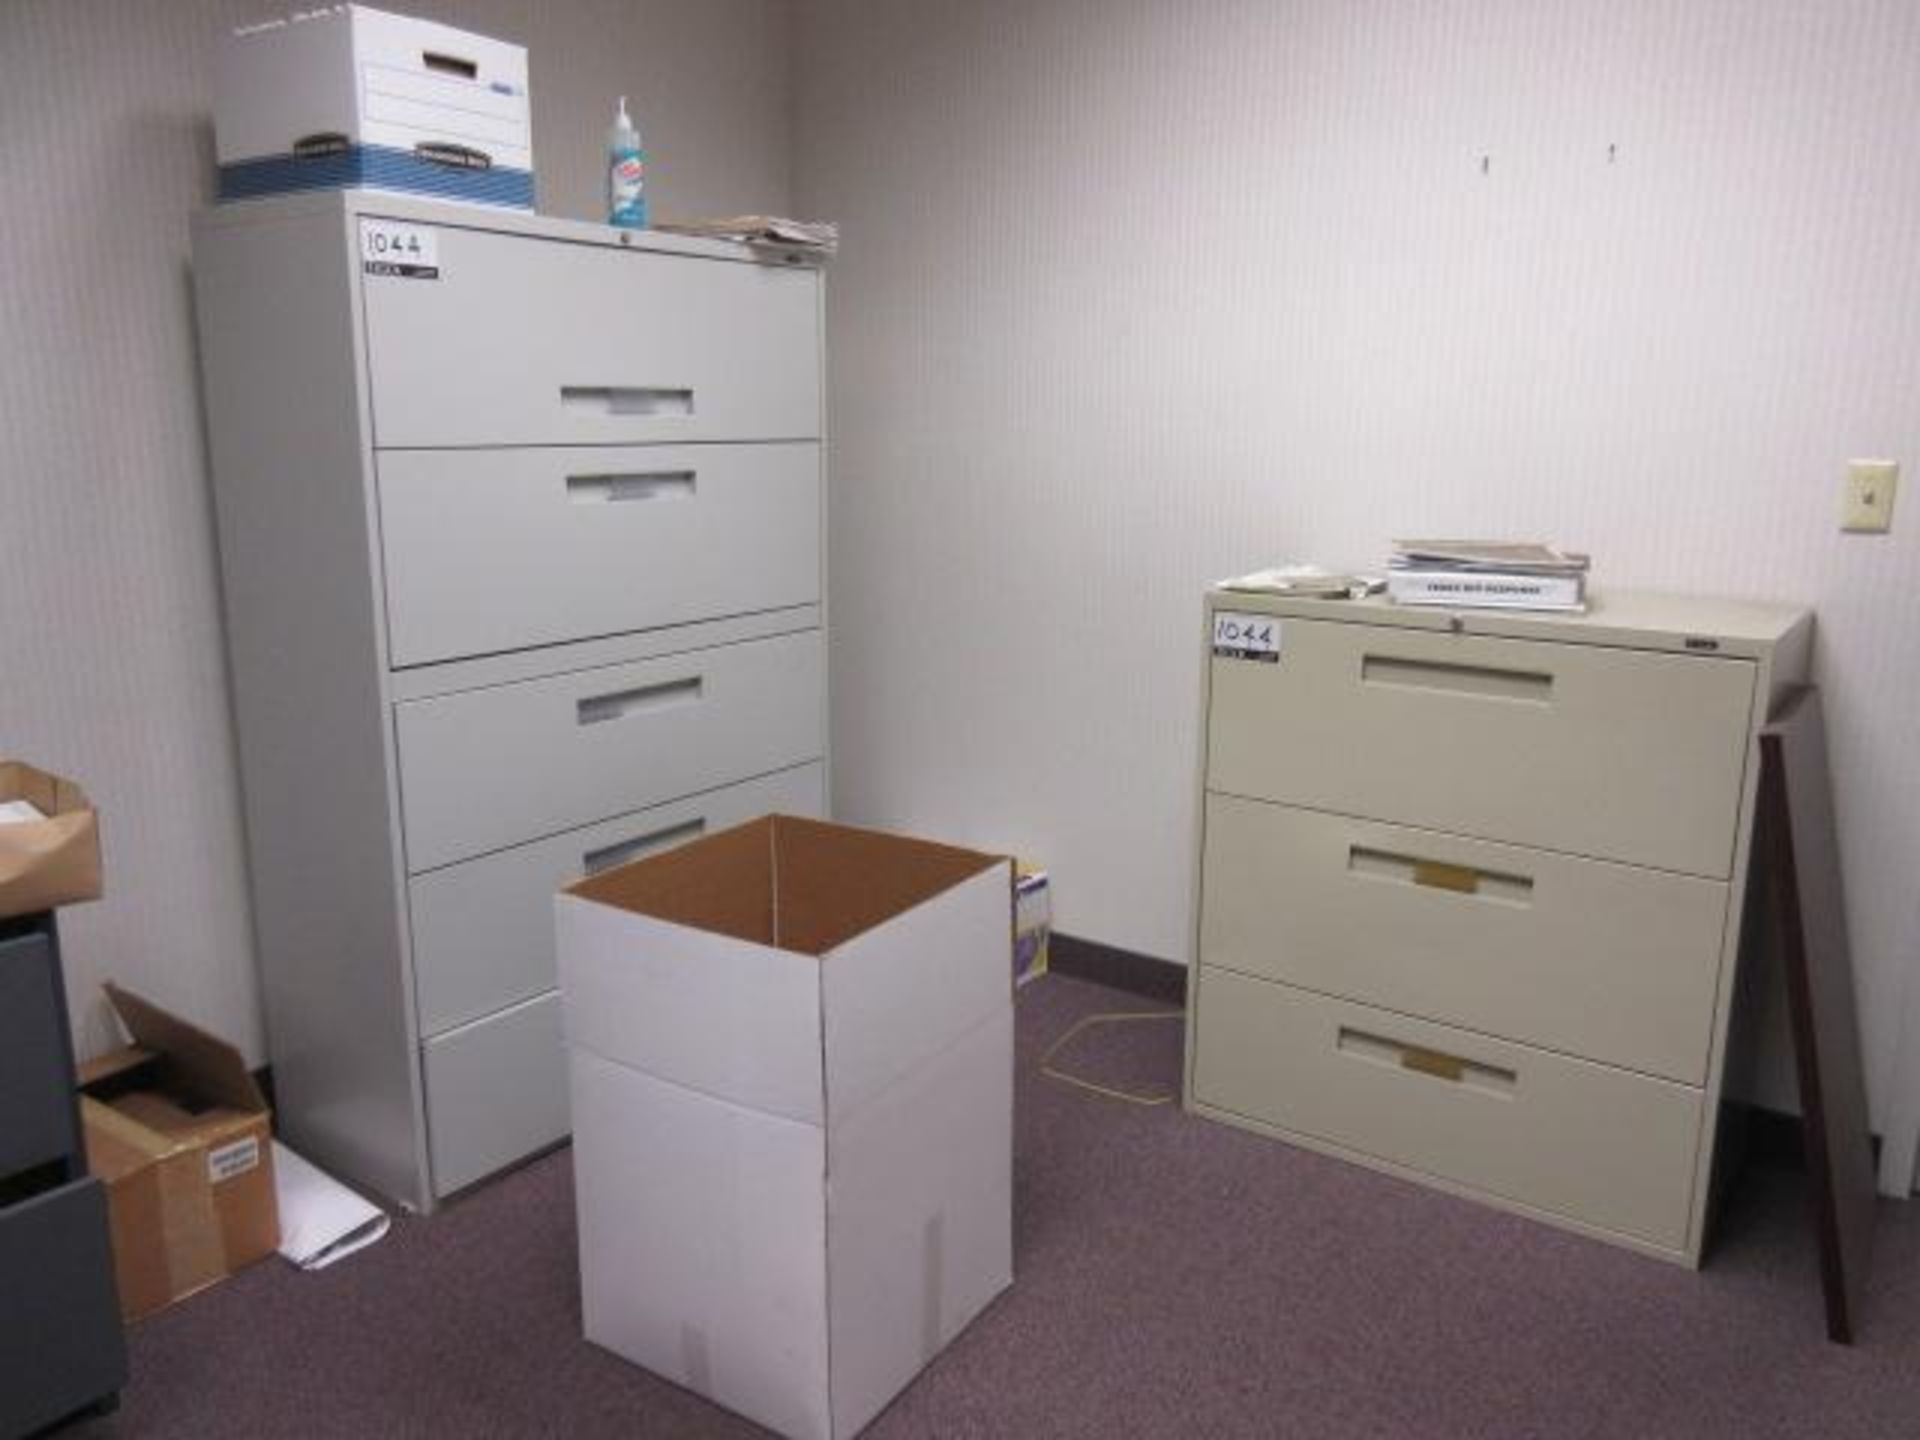 Contents of 3 Offices - Image 4 of 7